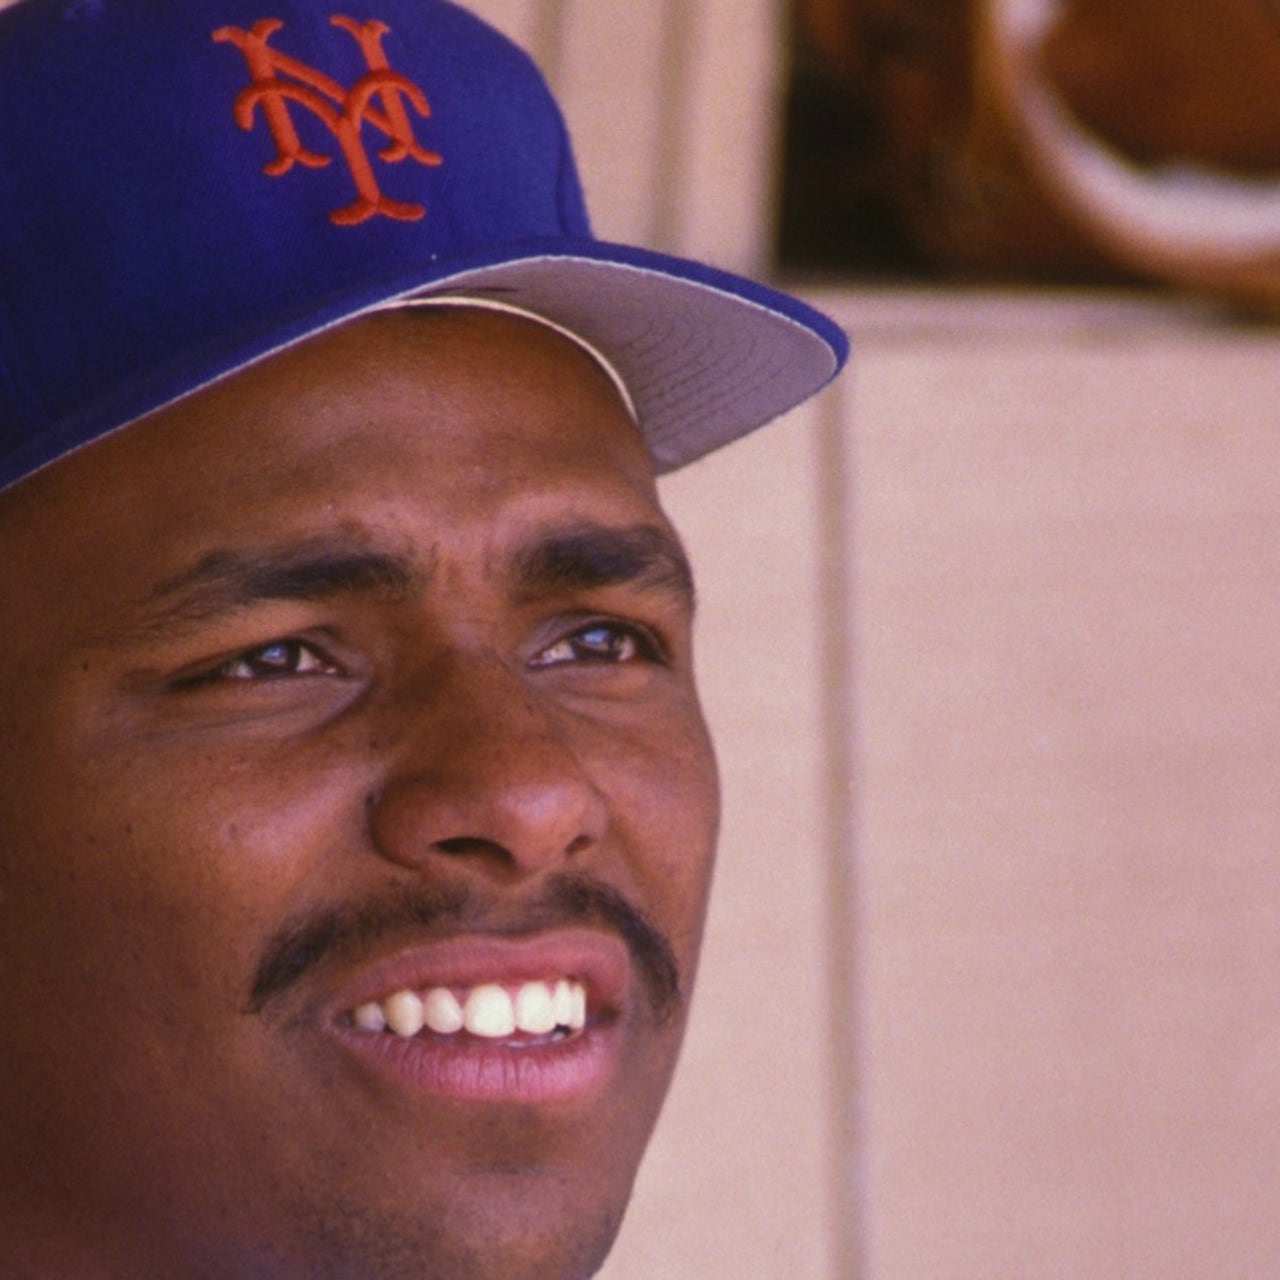 It's Bobby Bonilla Day: The New York Mets will pay retired Bobby Bonilla  $1.19 million today and every July 1 for the next 15 years 